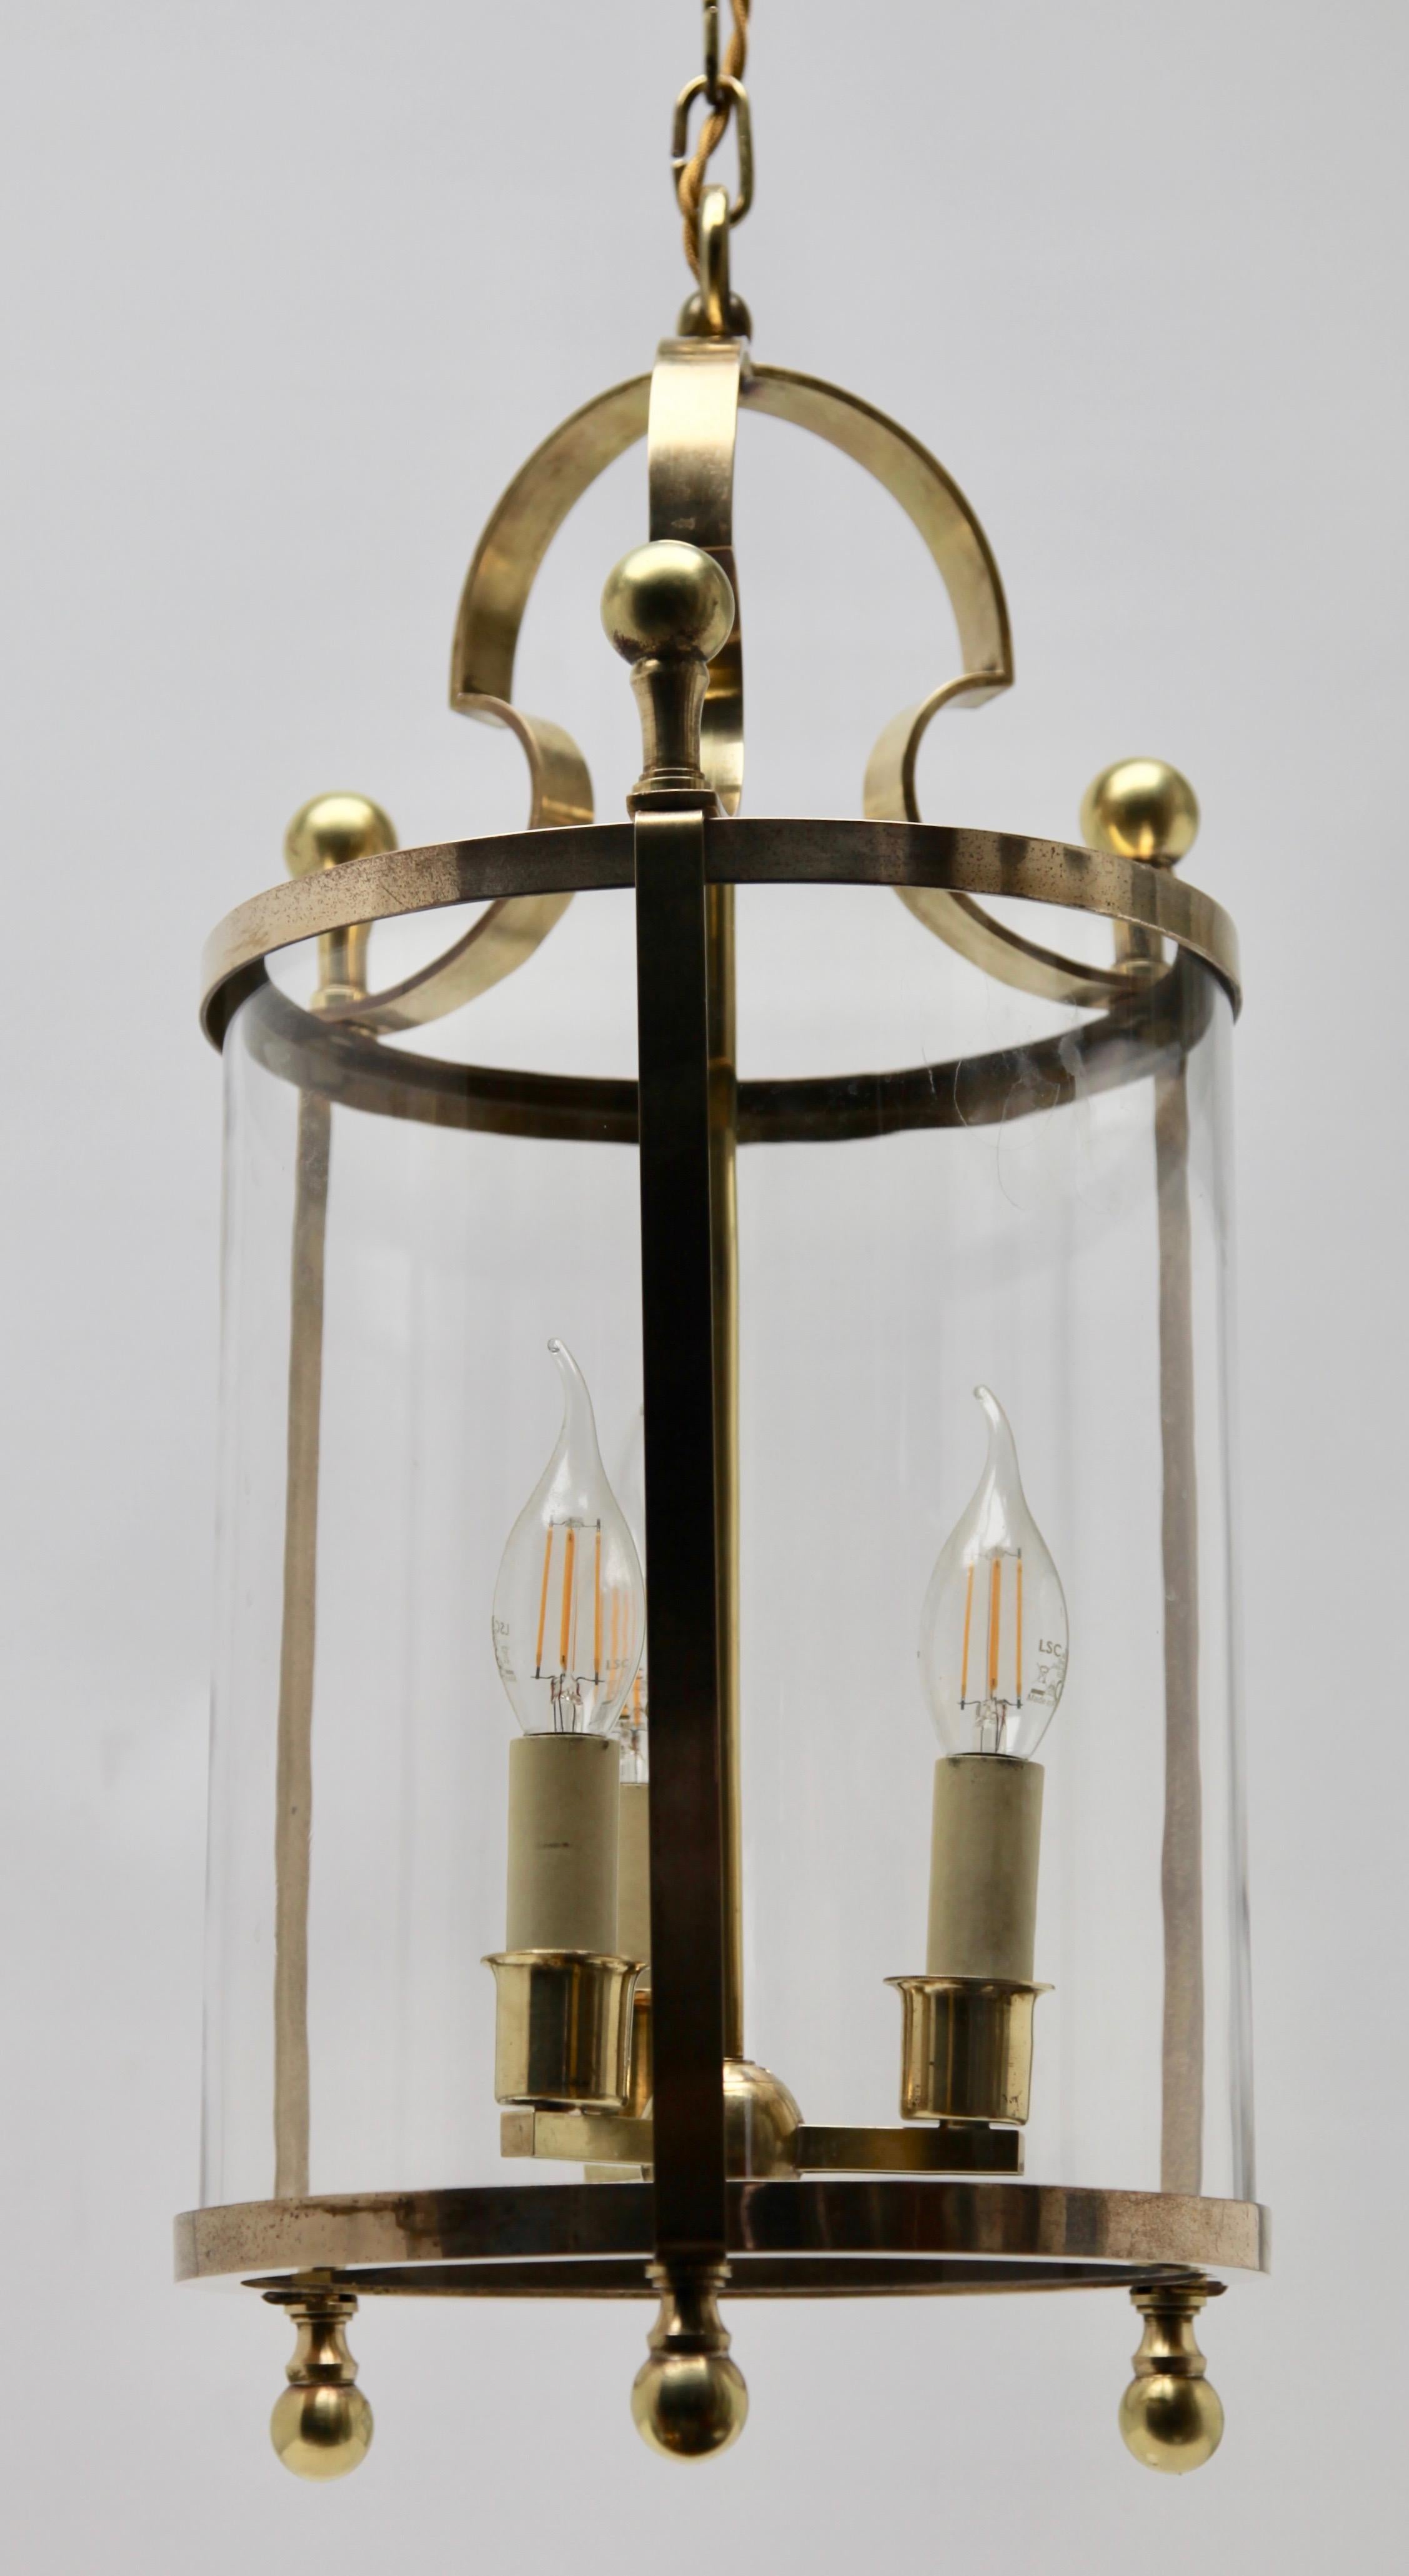 Hand-Crafted Solid Brass and Glass Lantern or Pendant Lamp For Sale